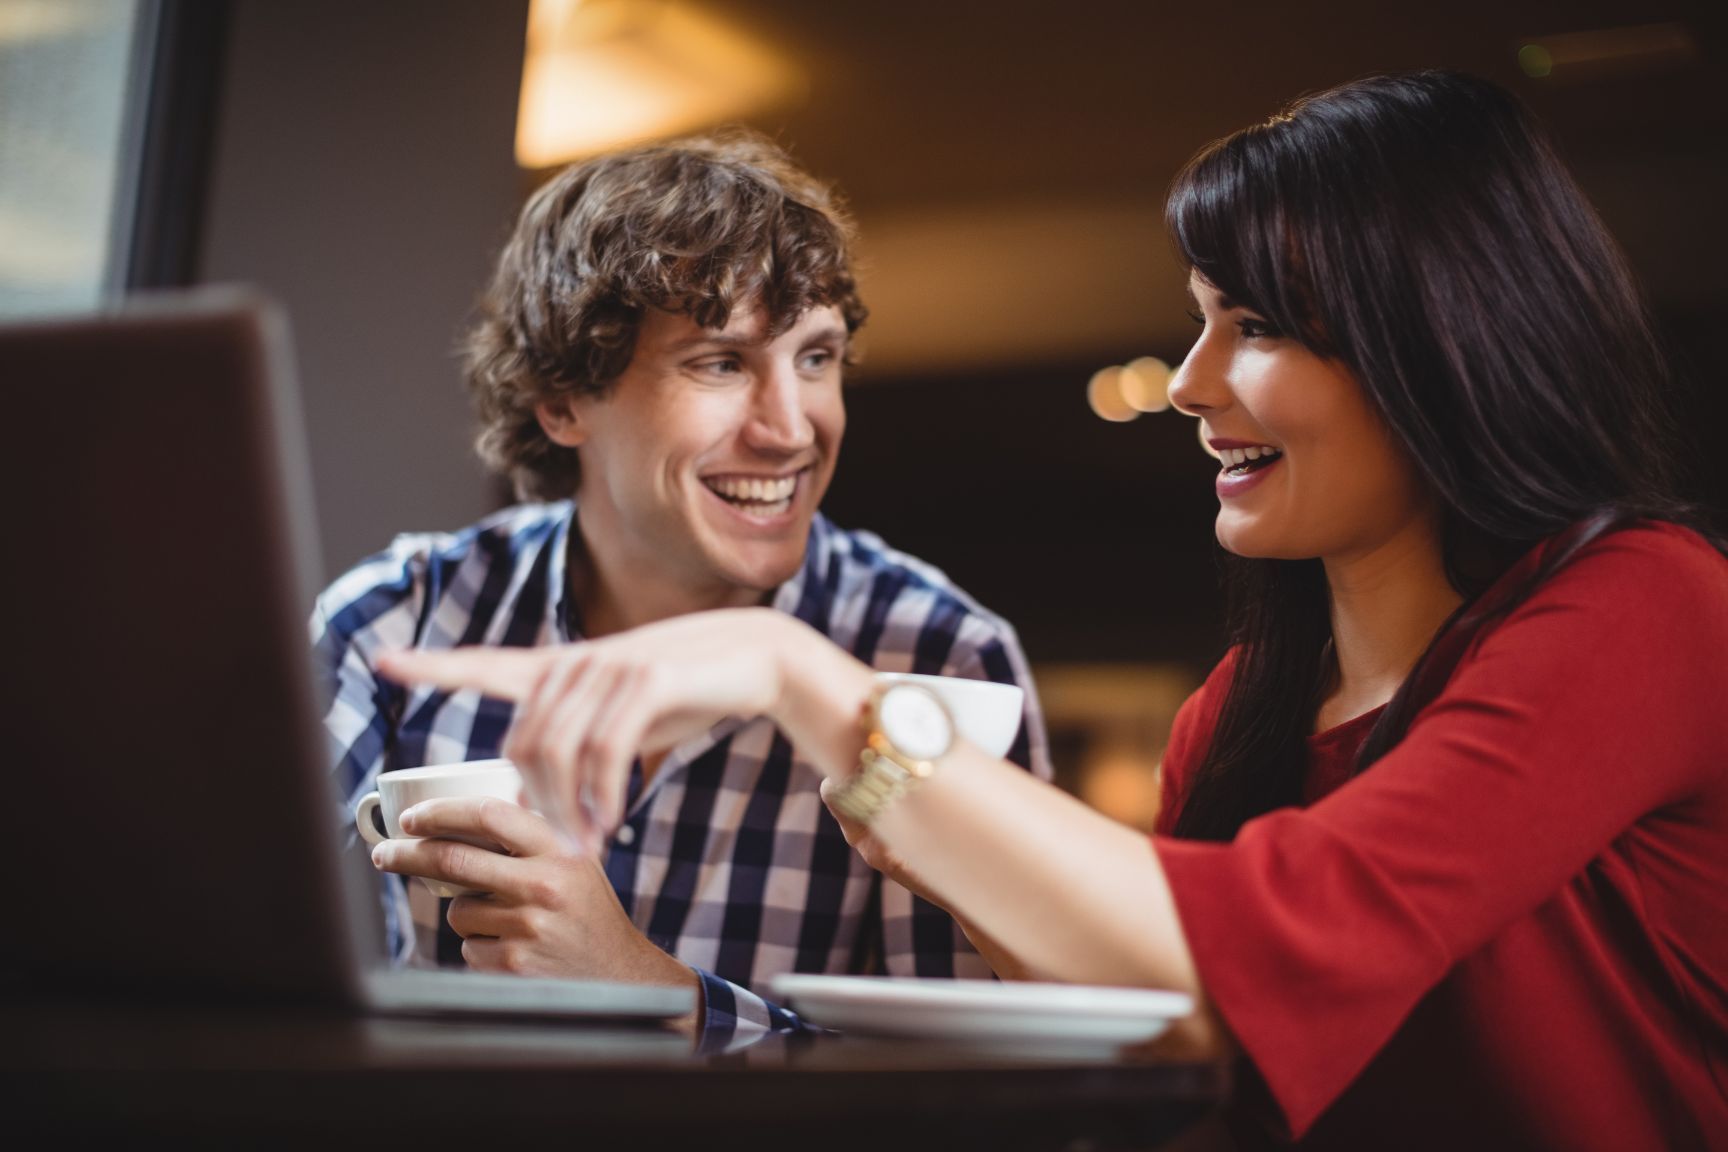 Man and woman at laptop laughing - Twenty-eight helpful sales strategy ideas for boosting your business growth - Image